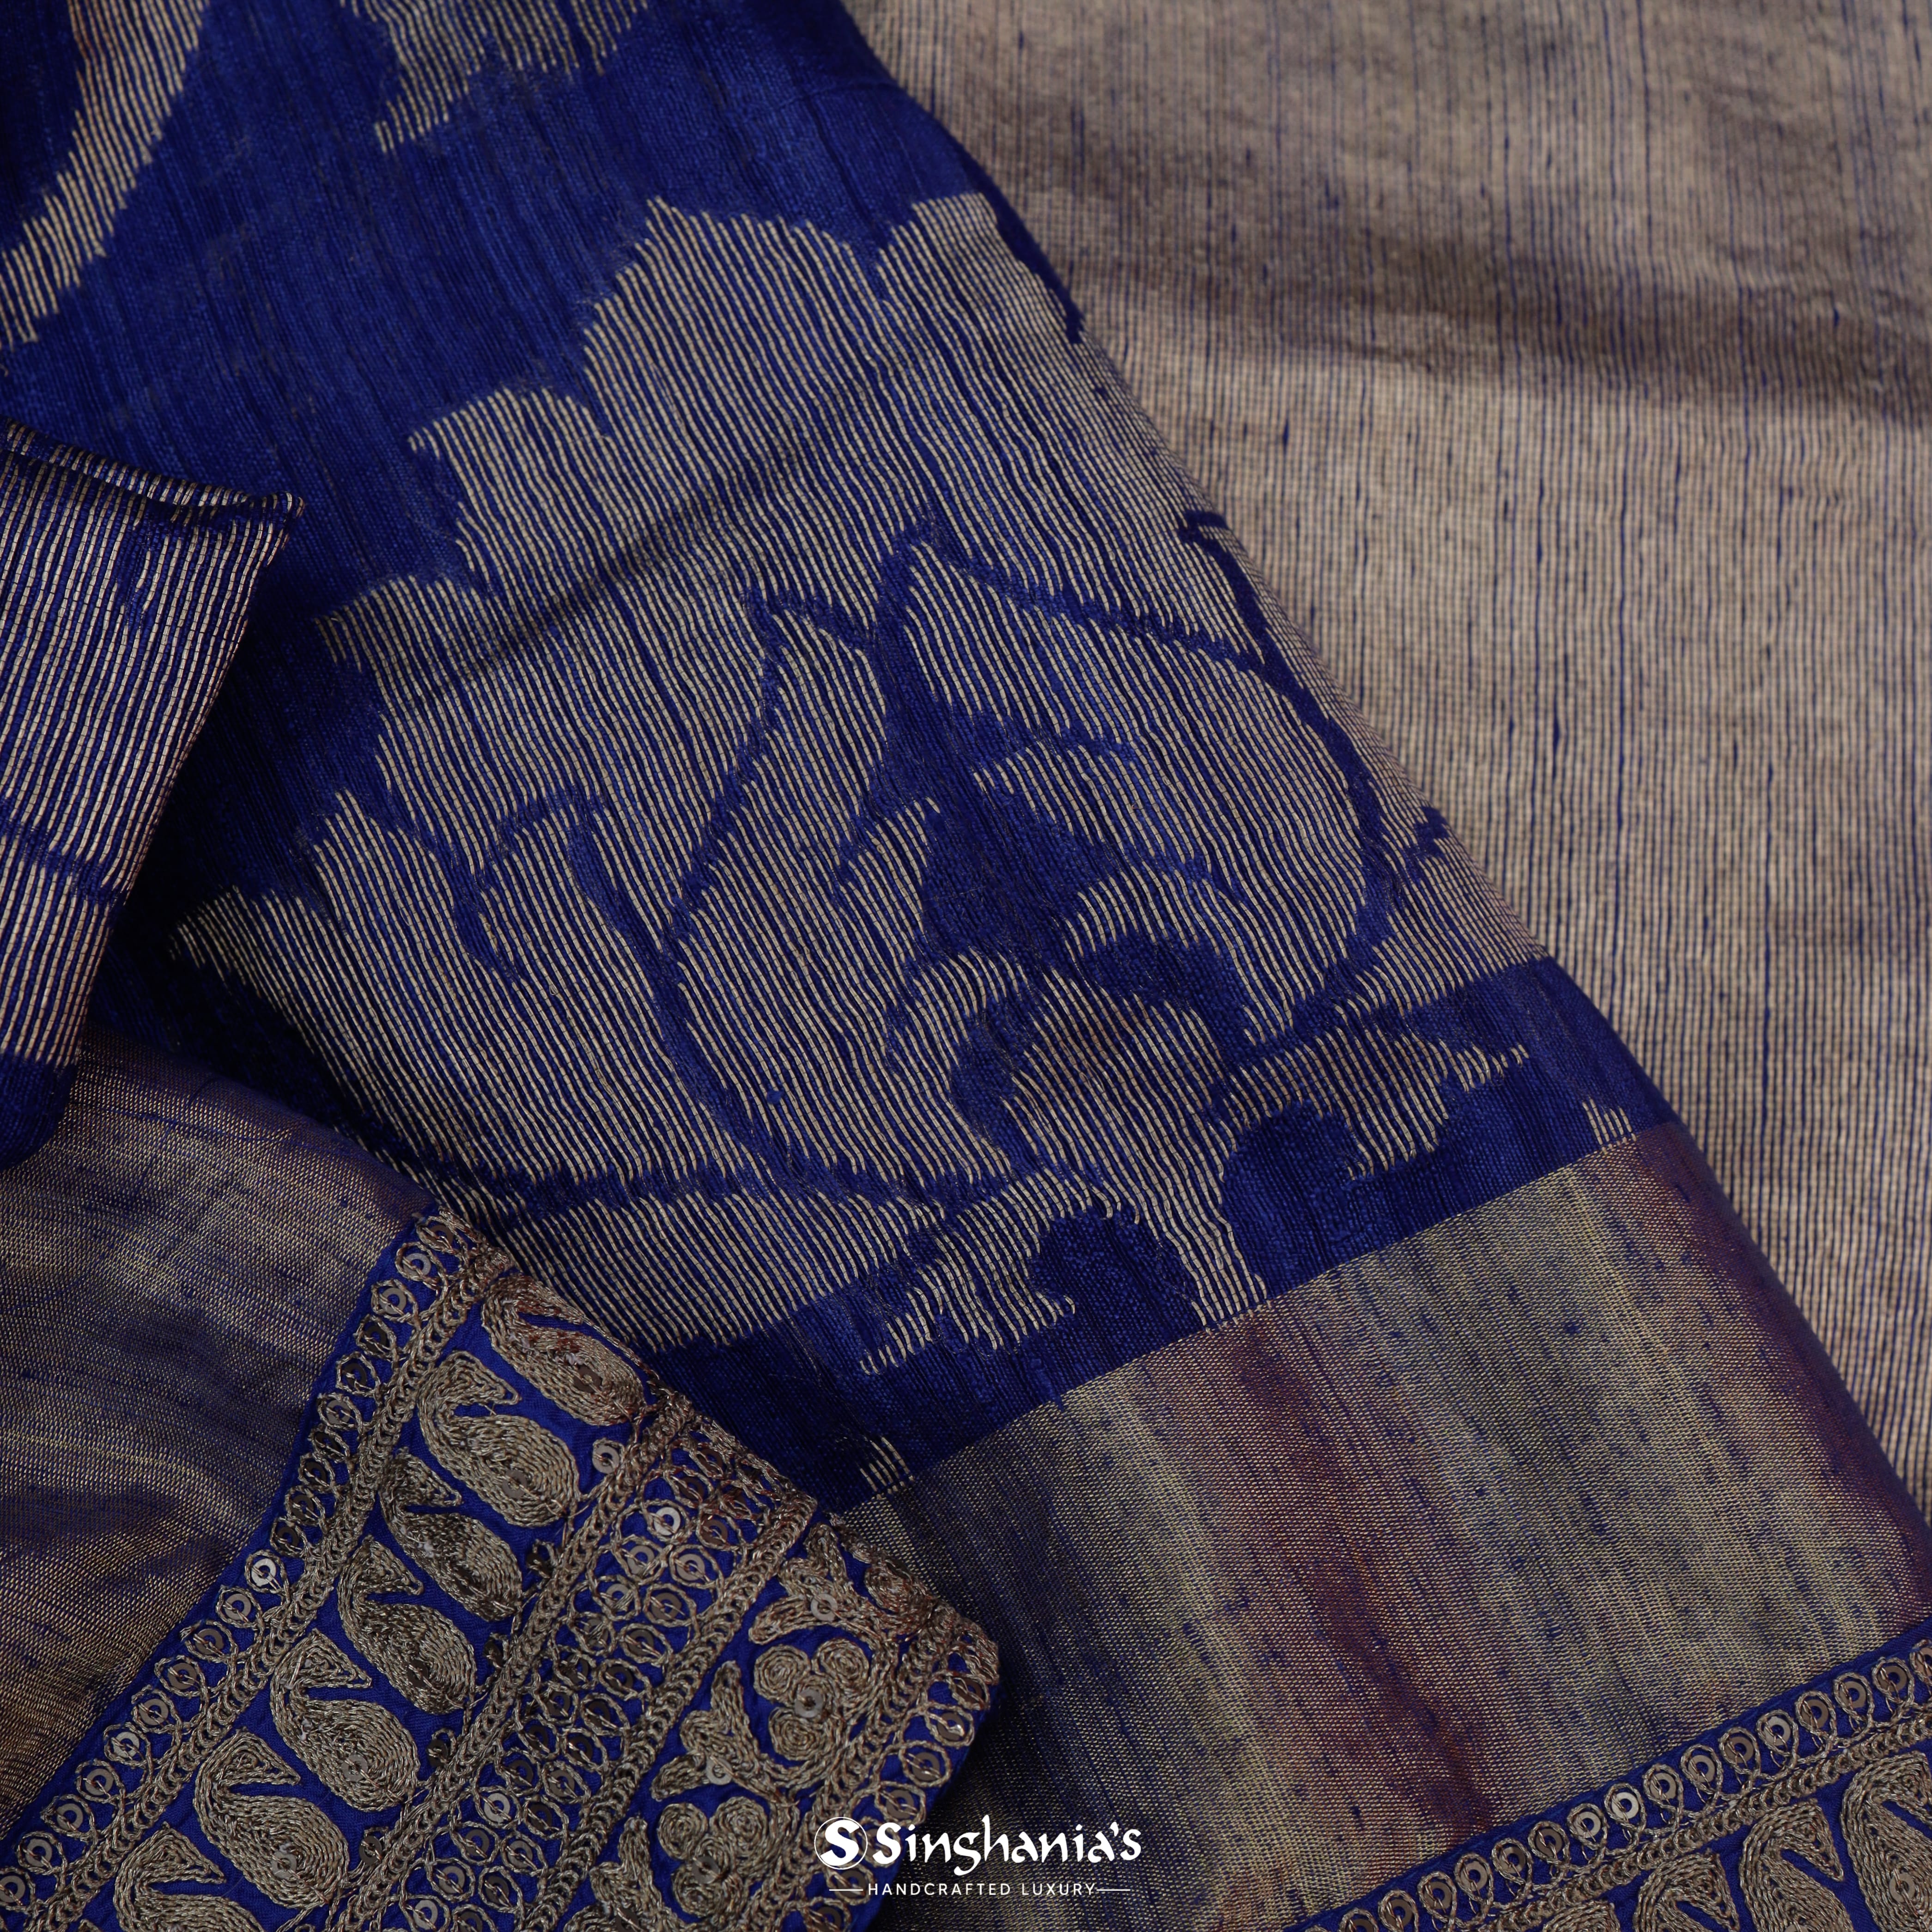 Midnight Blue Matka Printed With Floral Printed Motifs